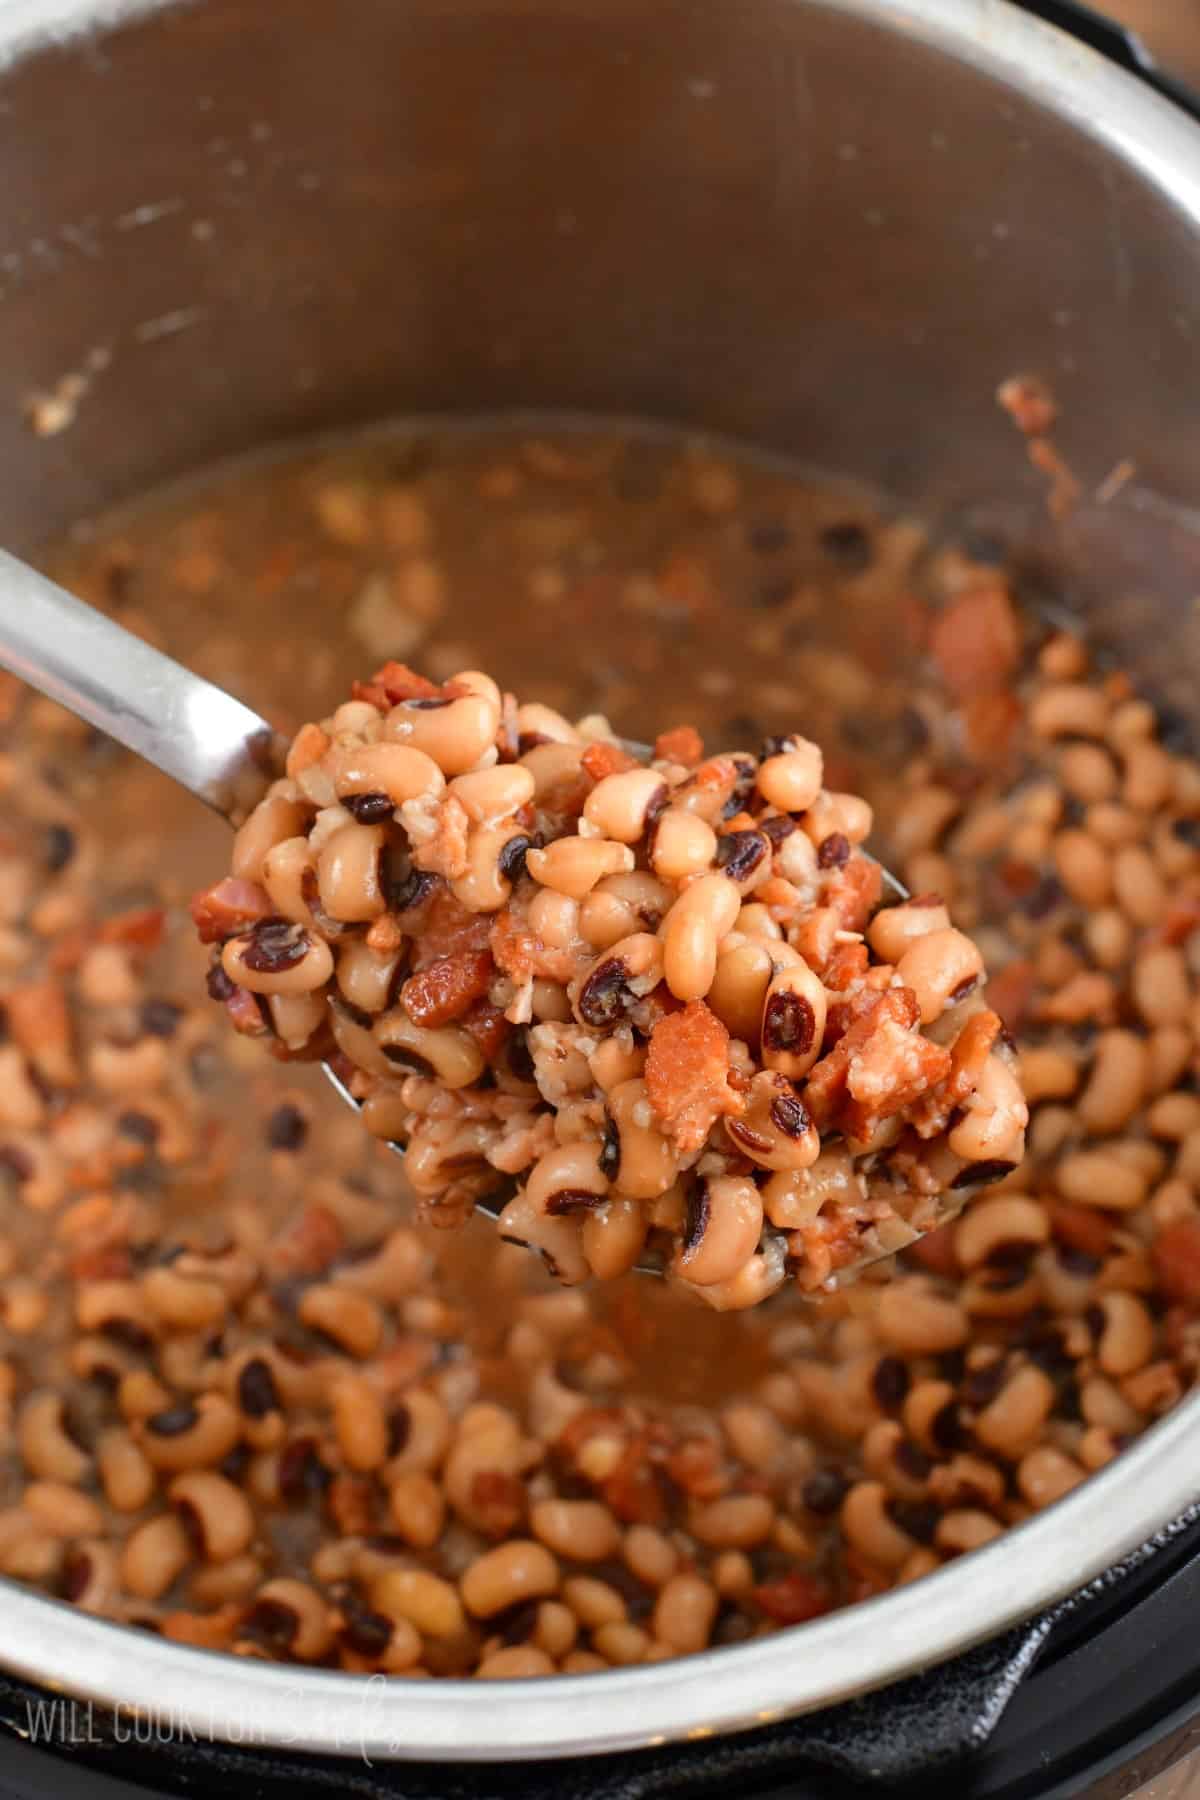 Big spoon with a scoop of black eye peas from the instant pot.